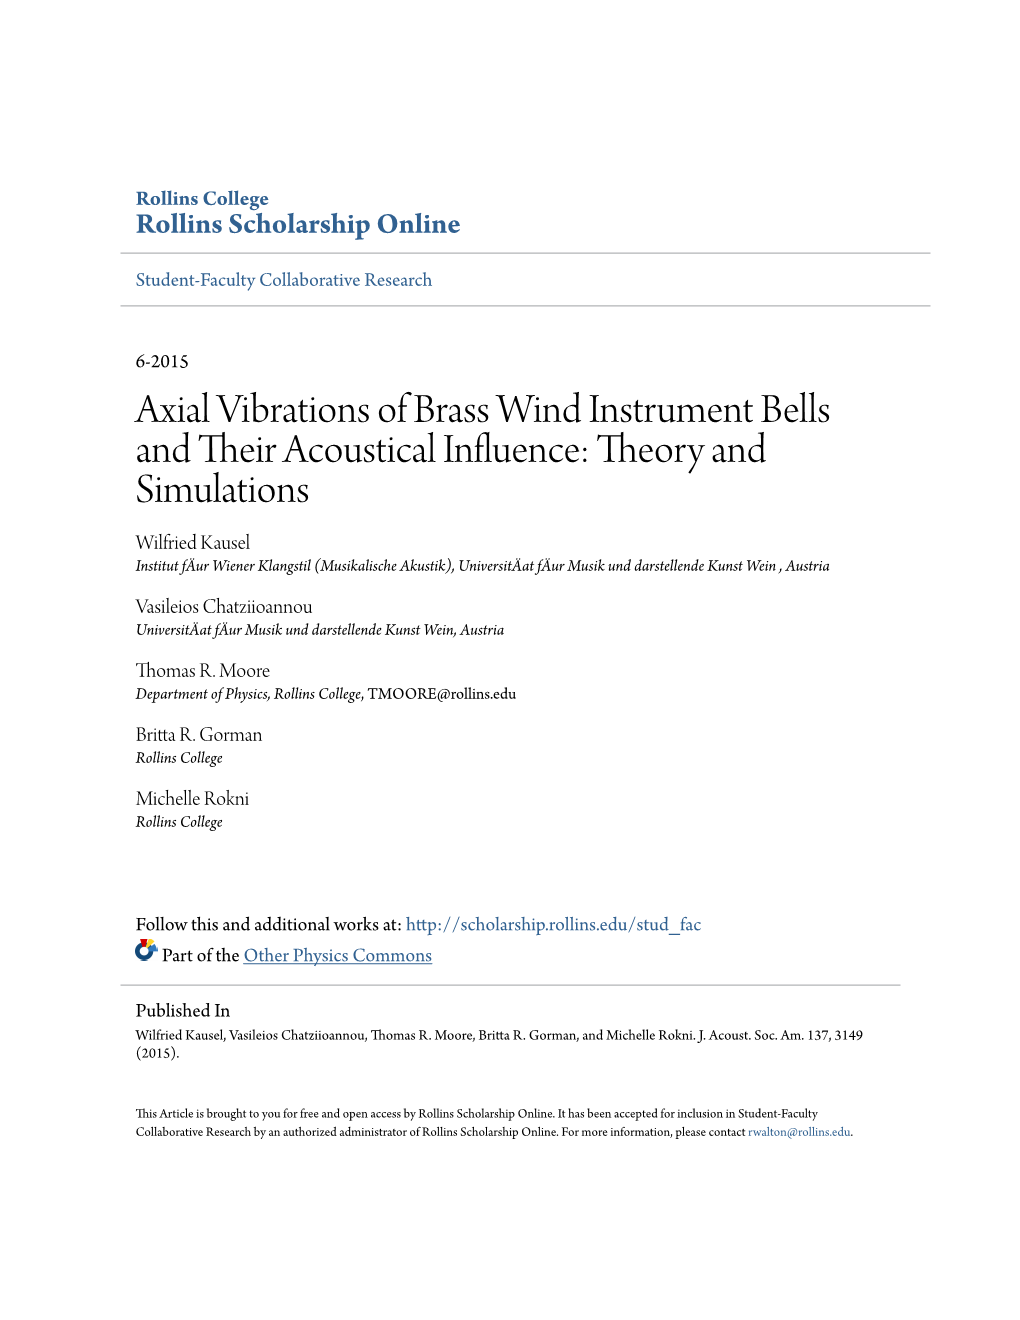 Axial Vibrations of Brass Wind Instrument Bells and Their